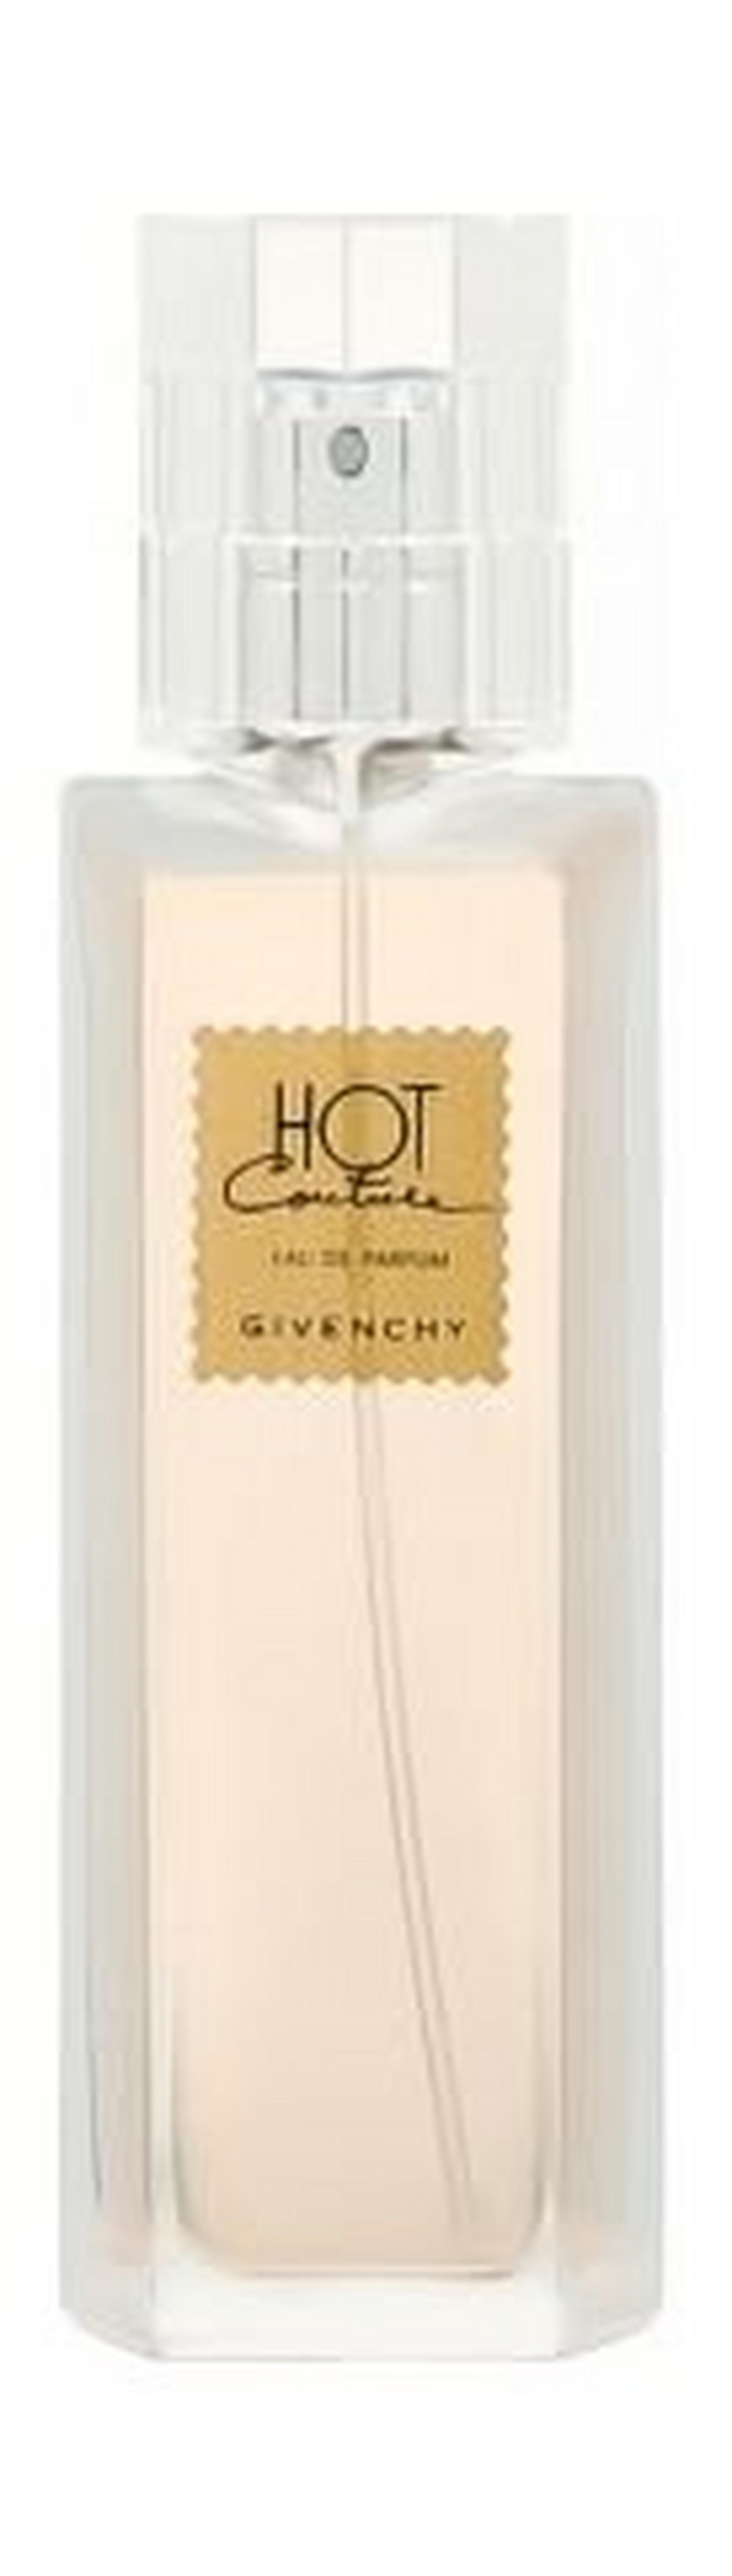 Givenchy Hot Couture Women 100 ml EDP